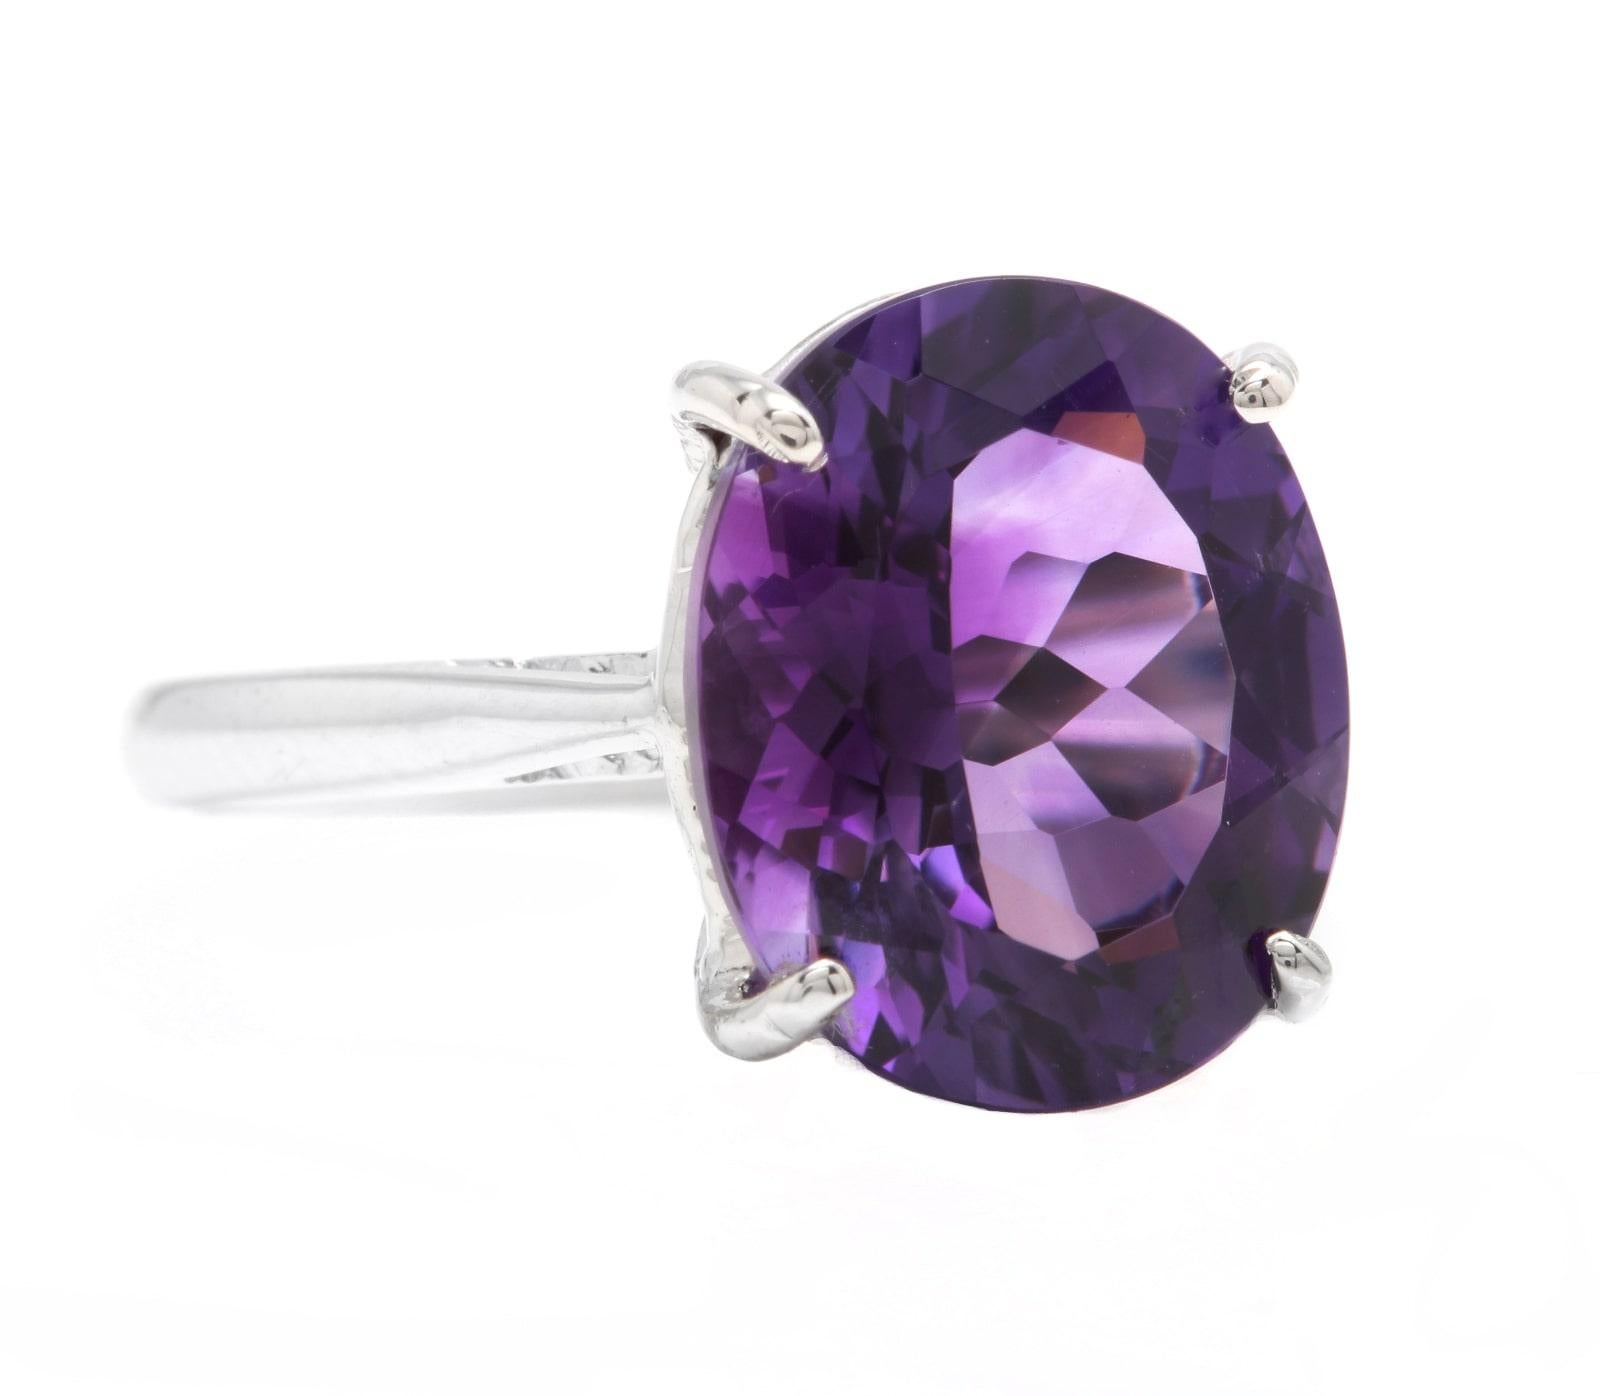 5.00 Carats Exquisite Natural Amethyst 14K Solid White Gold Ring

Total Natural Amethyst Weight is: Approx. 5.00 Carats 

Amethyst Measures: Approx. 12.00 x 10.00mm

Ring size: 5.5 ( Free Sizing available)

Ring total weight: Approx. 3.1